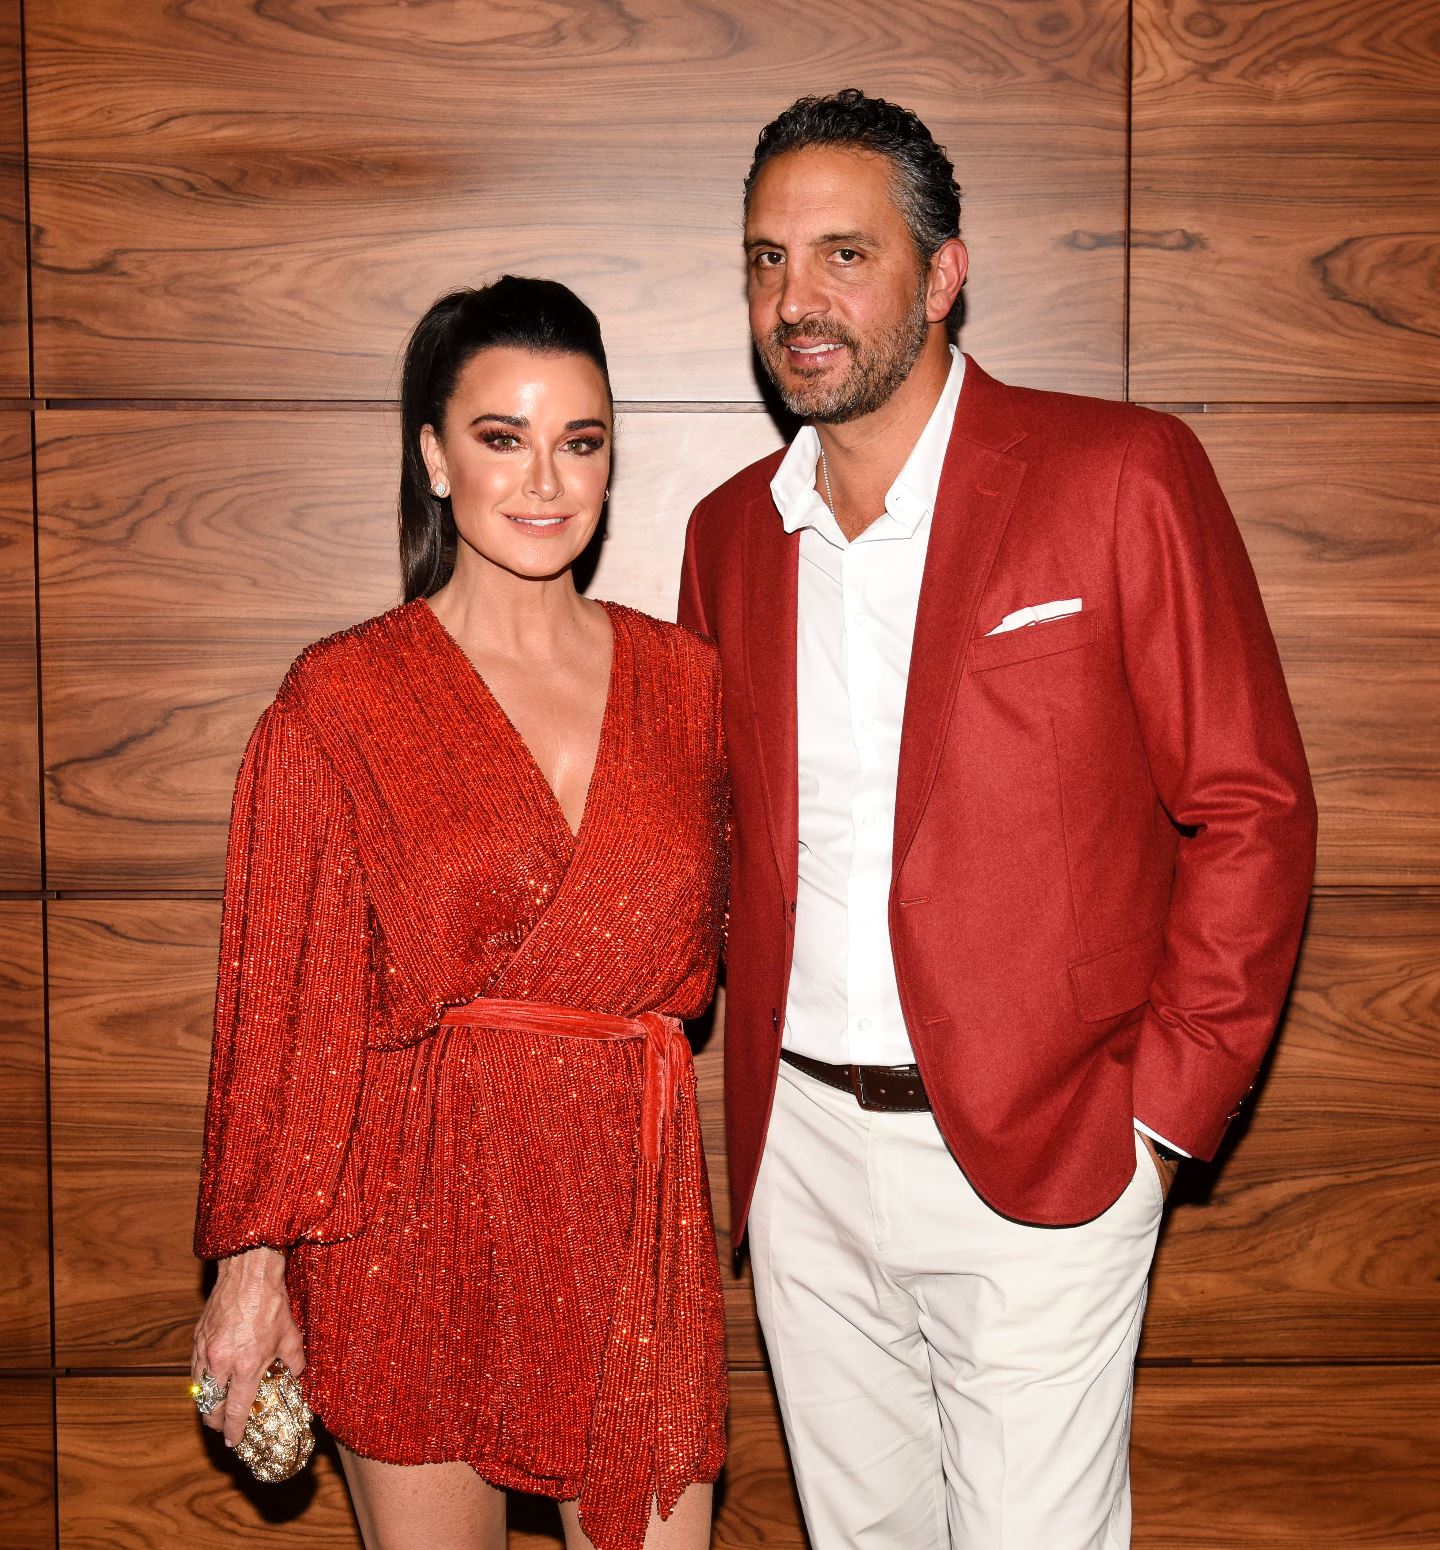 PHOTO: Kyle Richards & Mauricio Umansky Step Out Together for Daughter Portia's 16th Birthday, Plus RHOBH Star Talks His Role With Their Family's "New Addition"